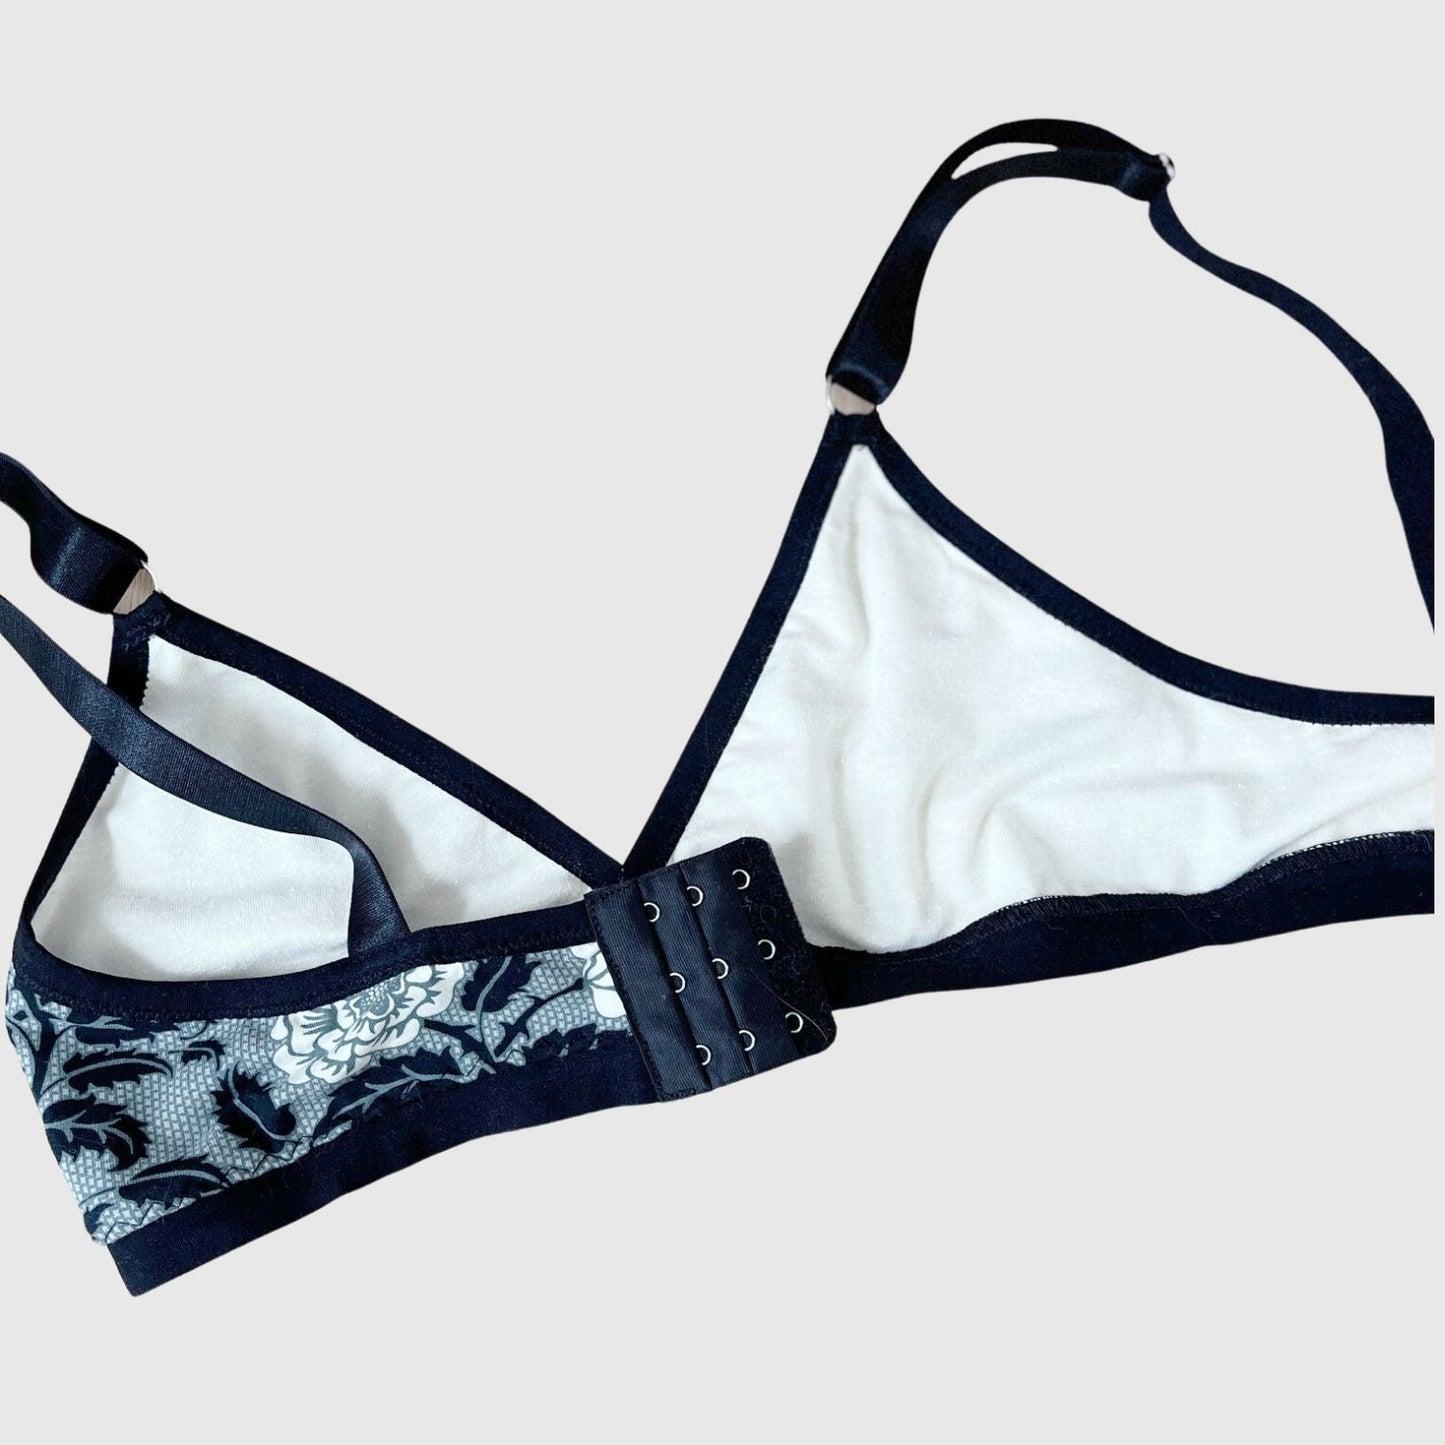 Natural organic cotton bra and underwear set | Made in Canada women's lingerie and underwear shop